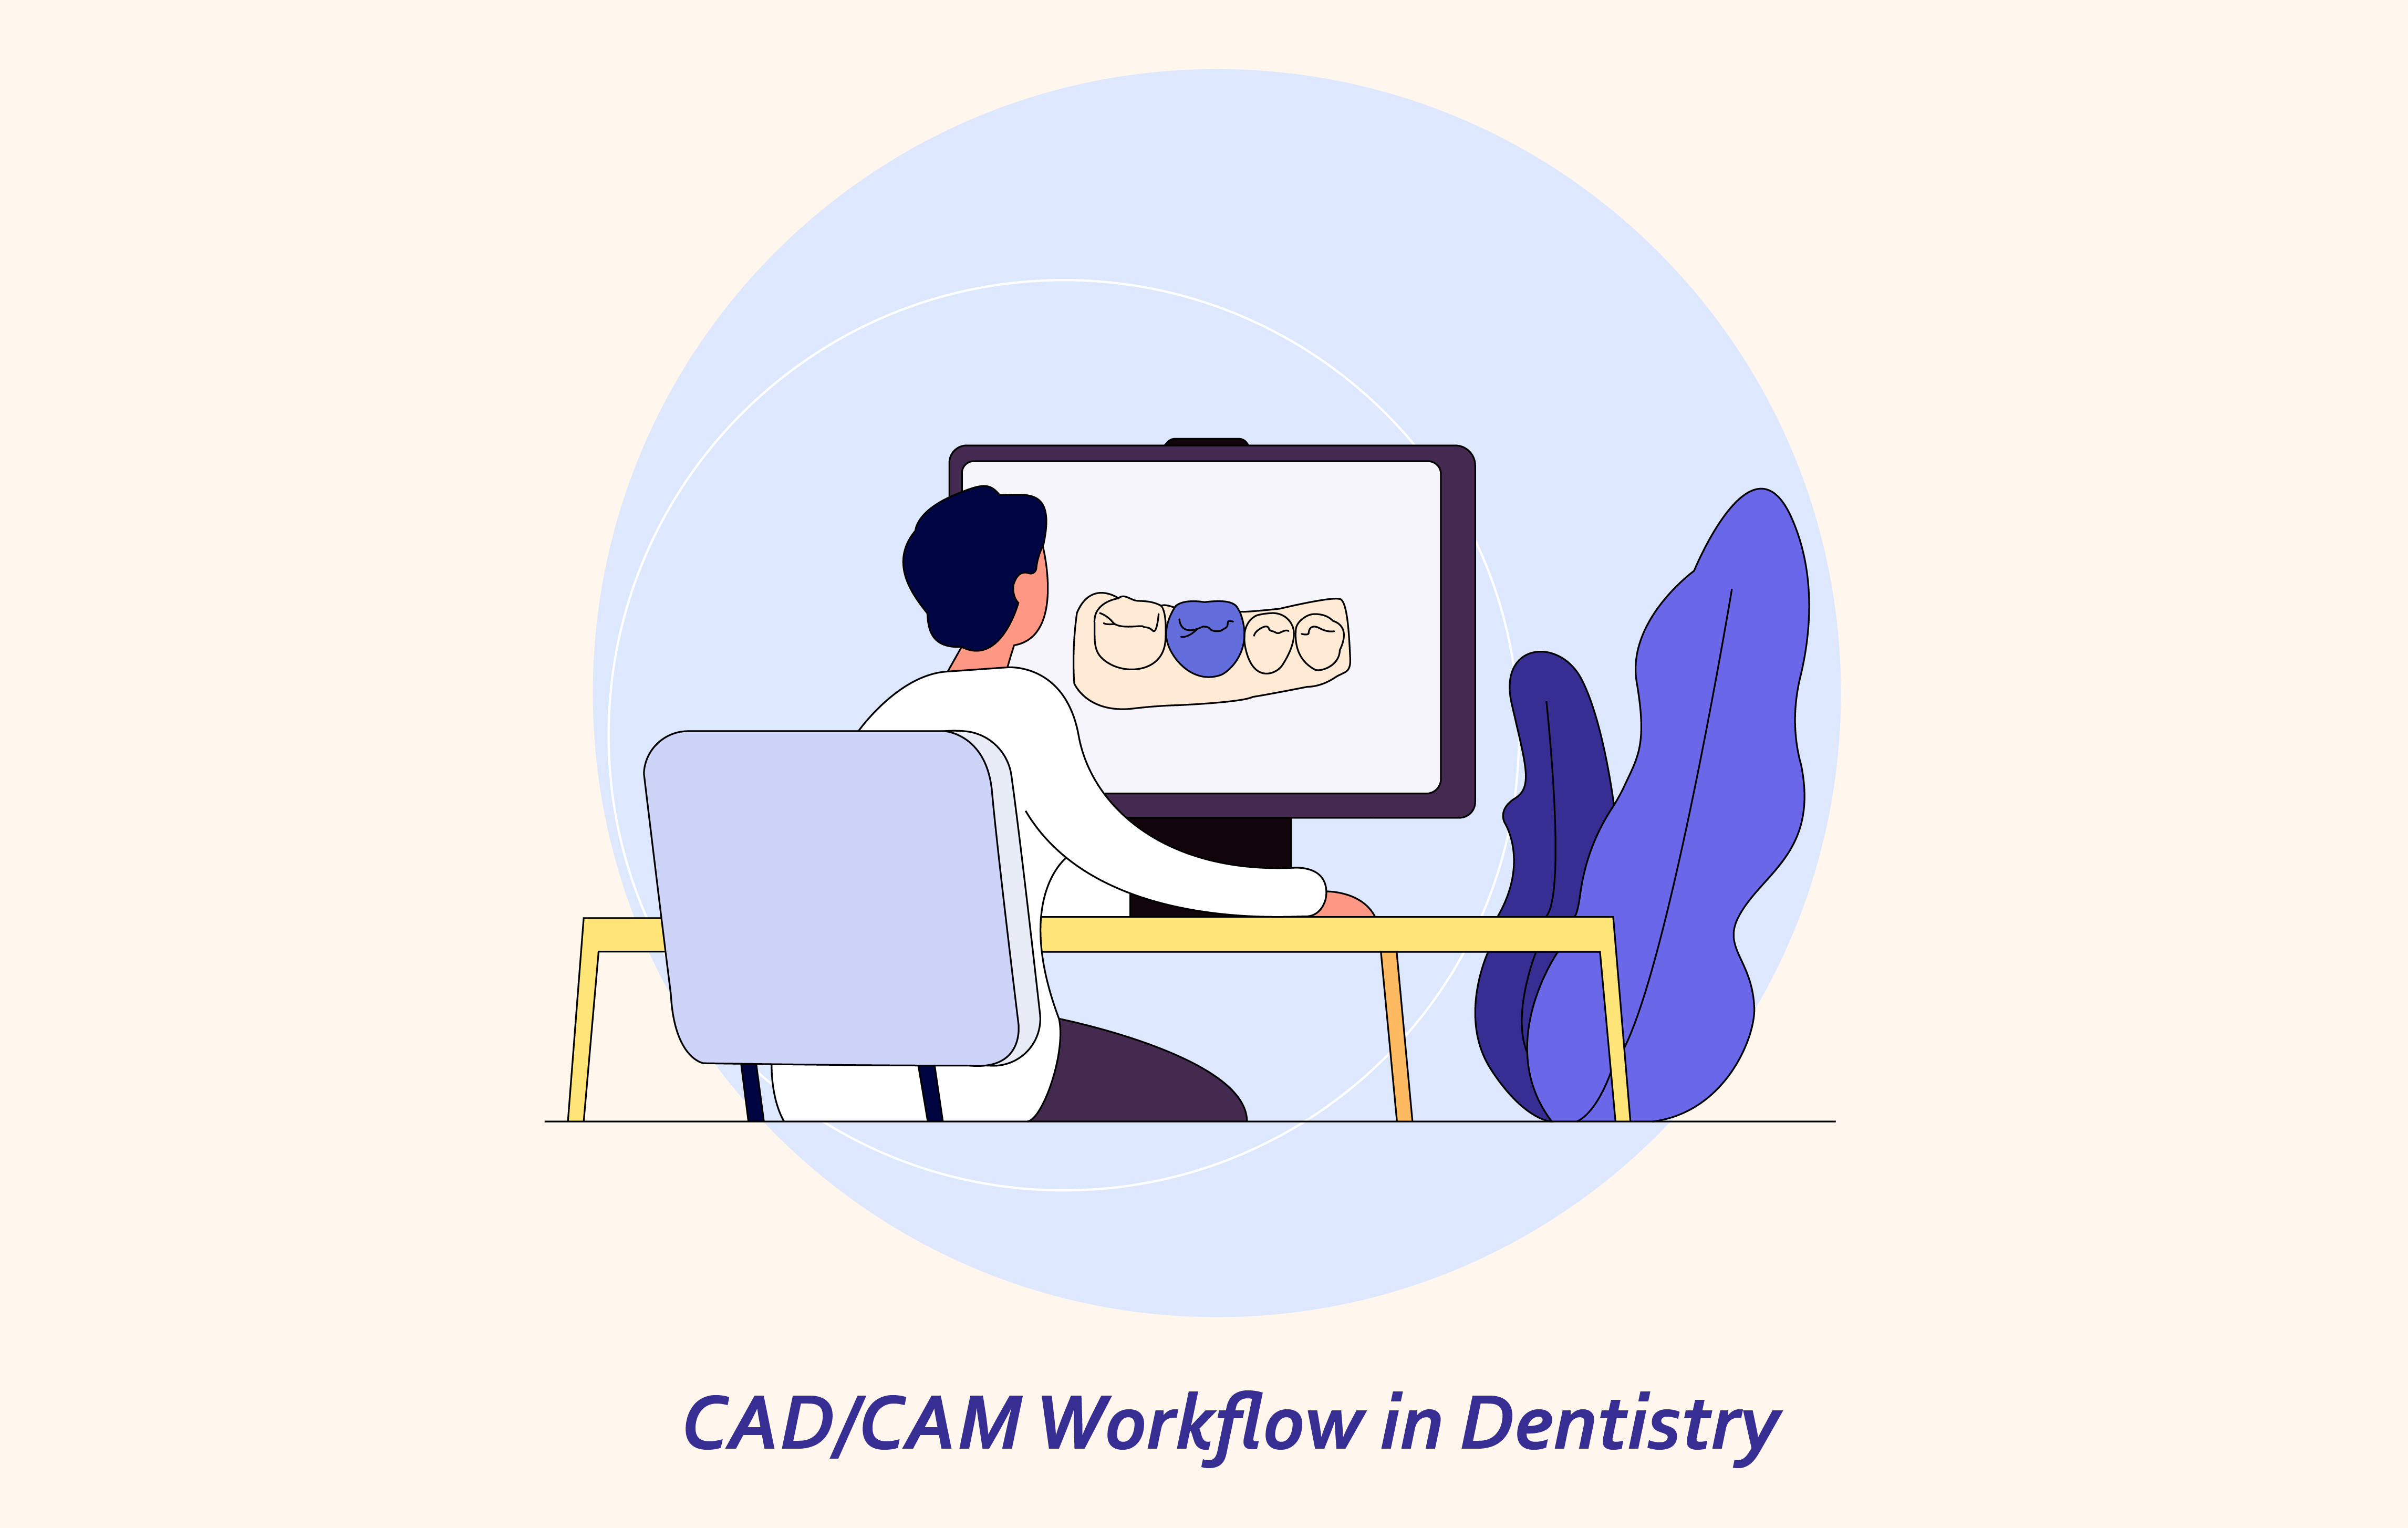 The CAD/CAM Workflow in Dentistry